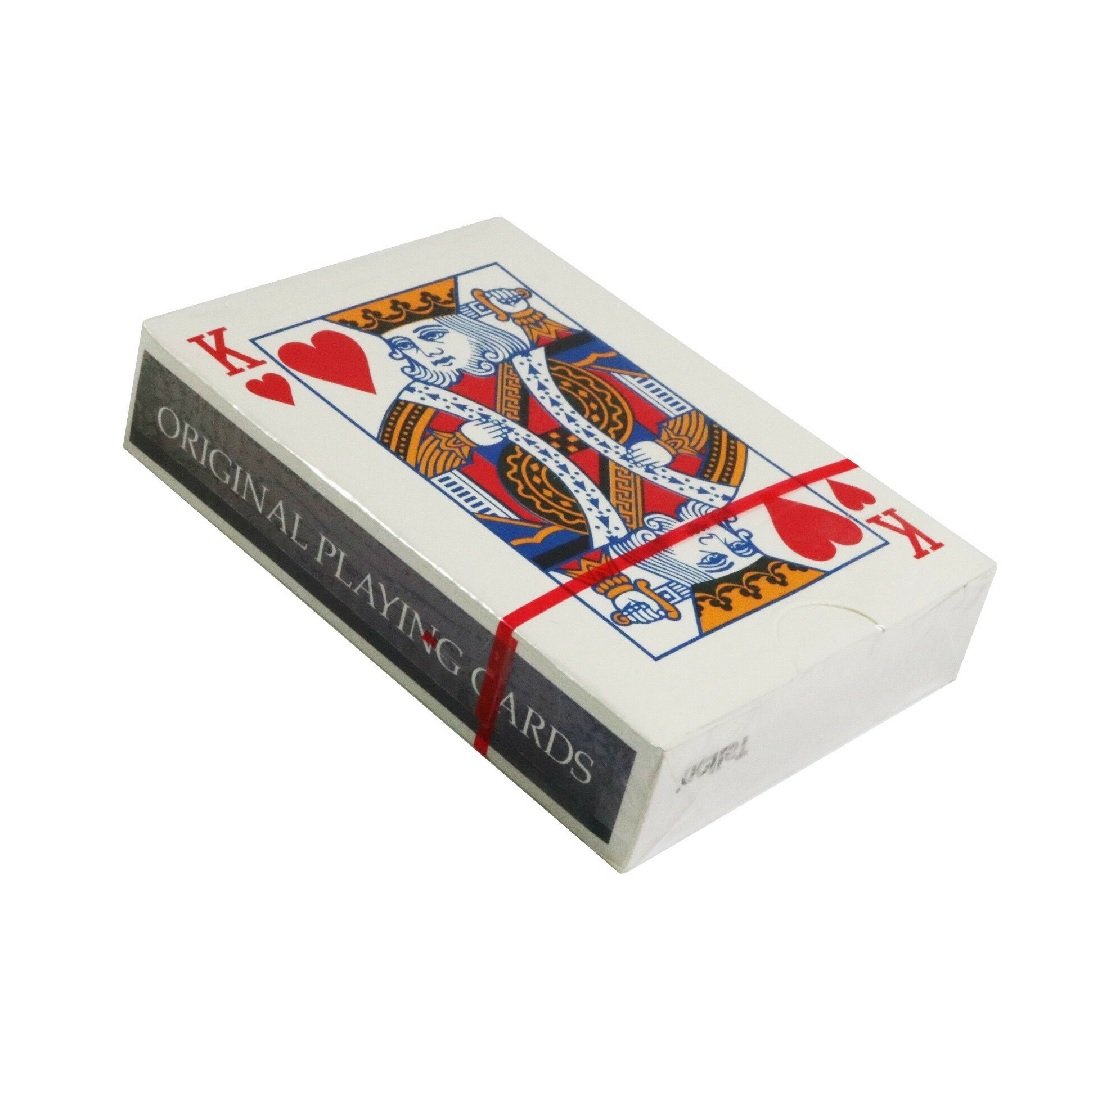 plastic-coated-playing-cards-set-poker-rummy-blackjack-more-indoor-outdoors